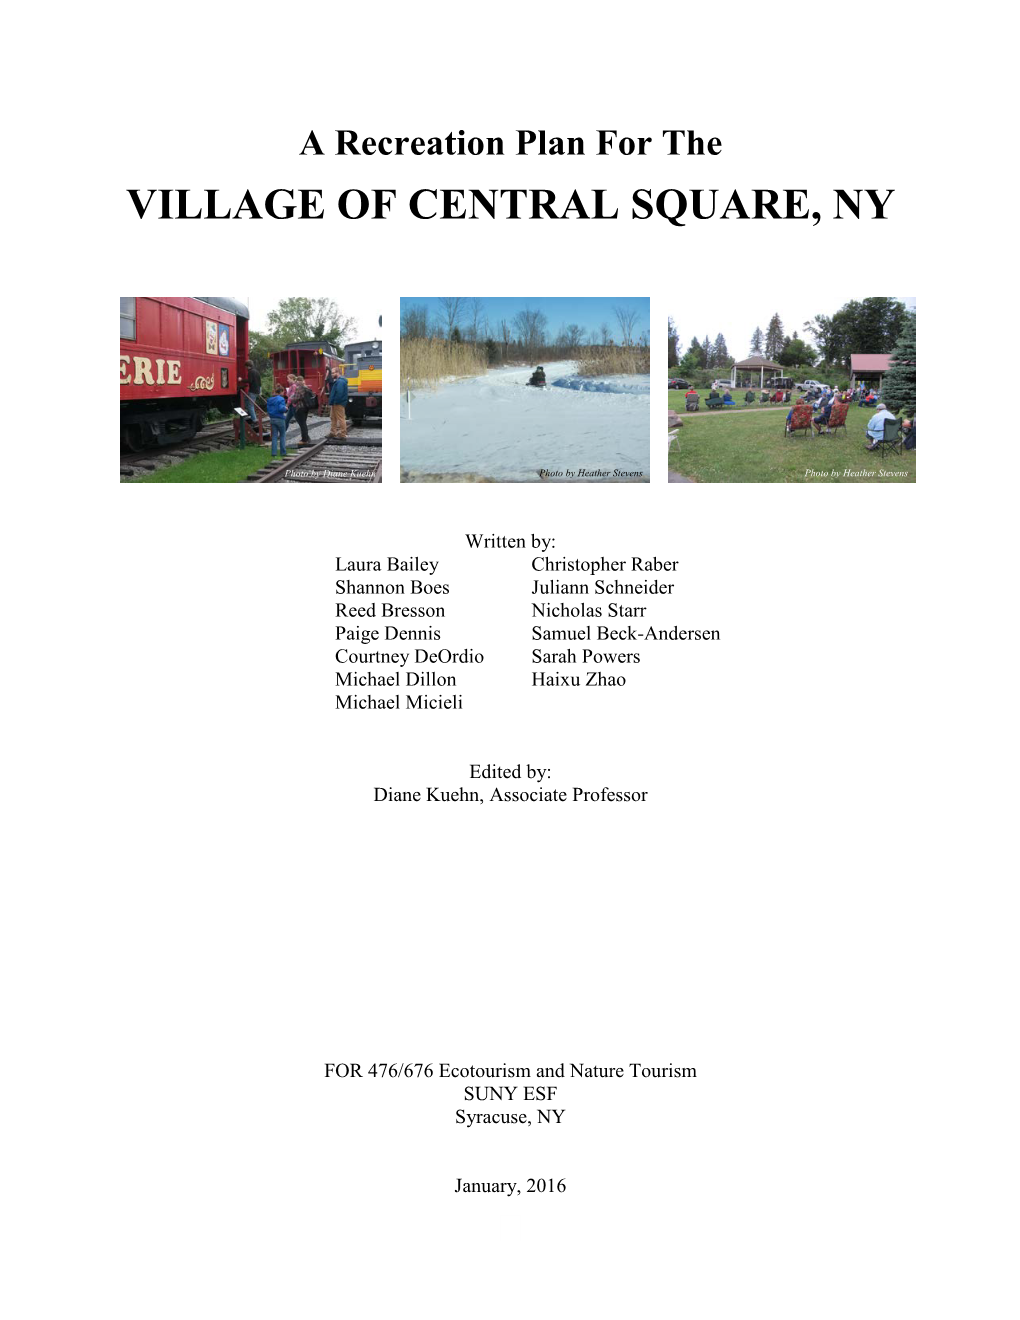 A Recreation Plan for the Village of Central Square, NY